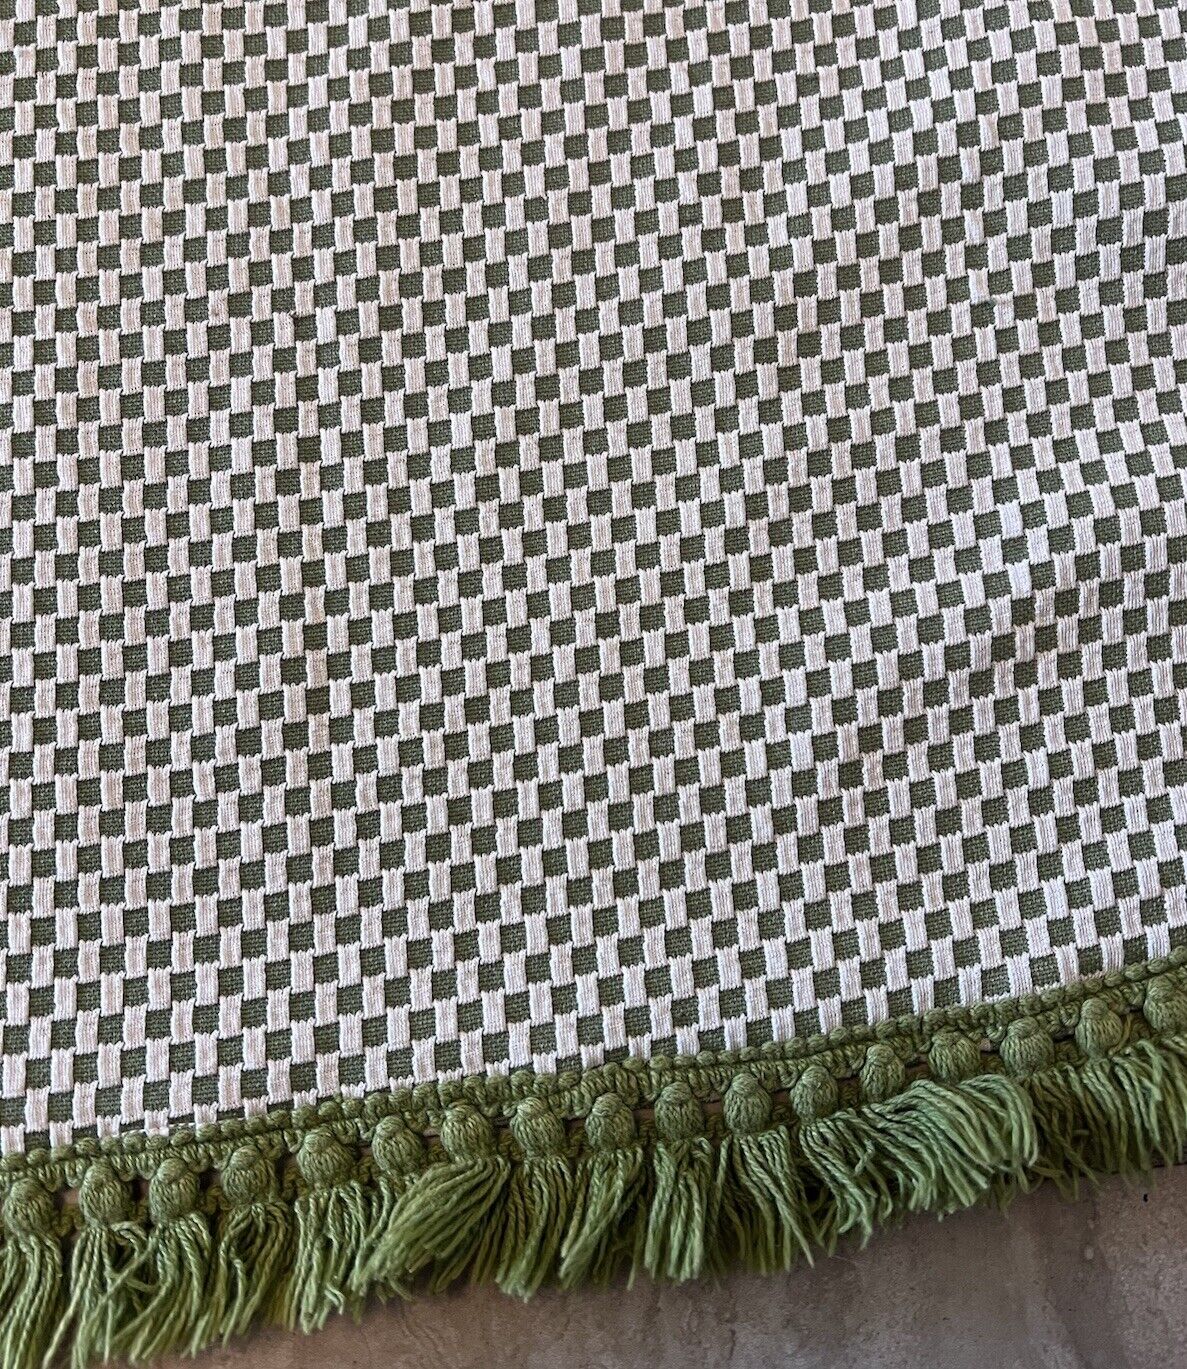 Vintage MCM Avocado Green And White Cloth Tablecloth With Fringe 116 X70 Inches.